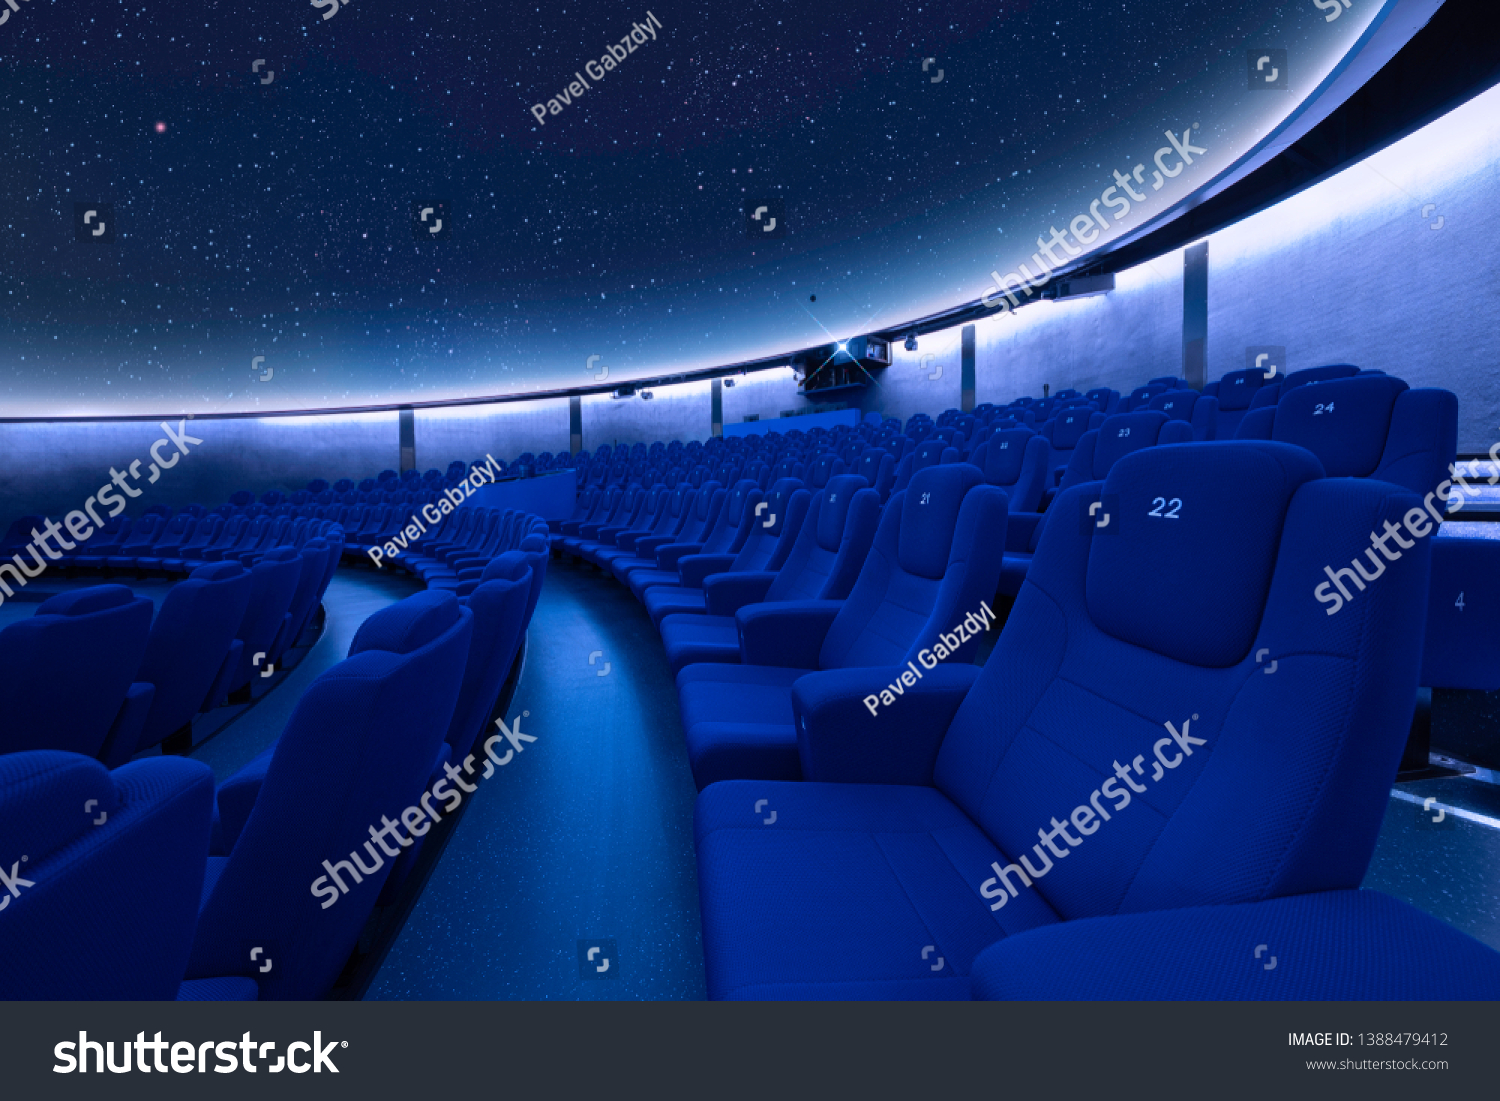 A breathtaking star projection at the planetarium with comfortable seats #1388479412